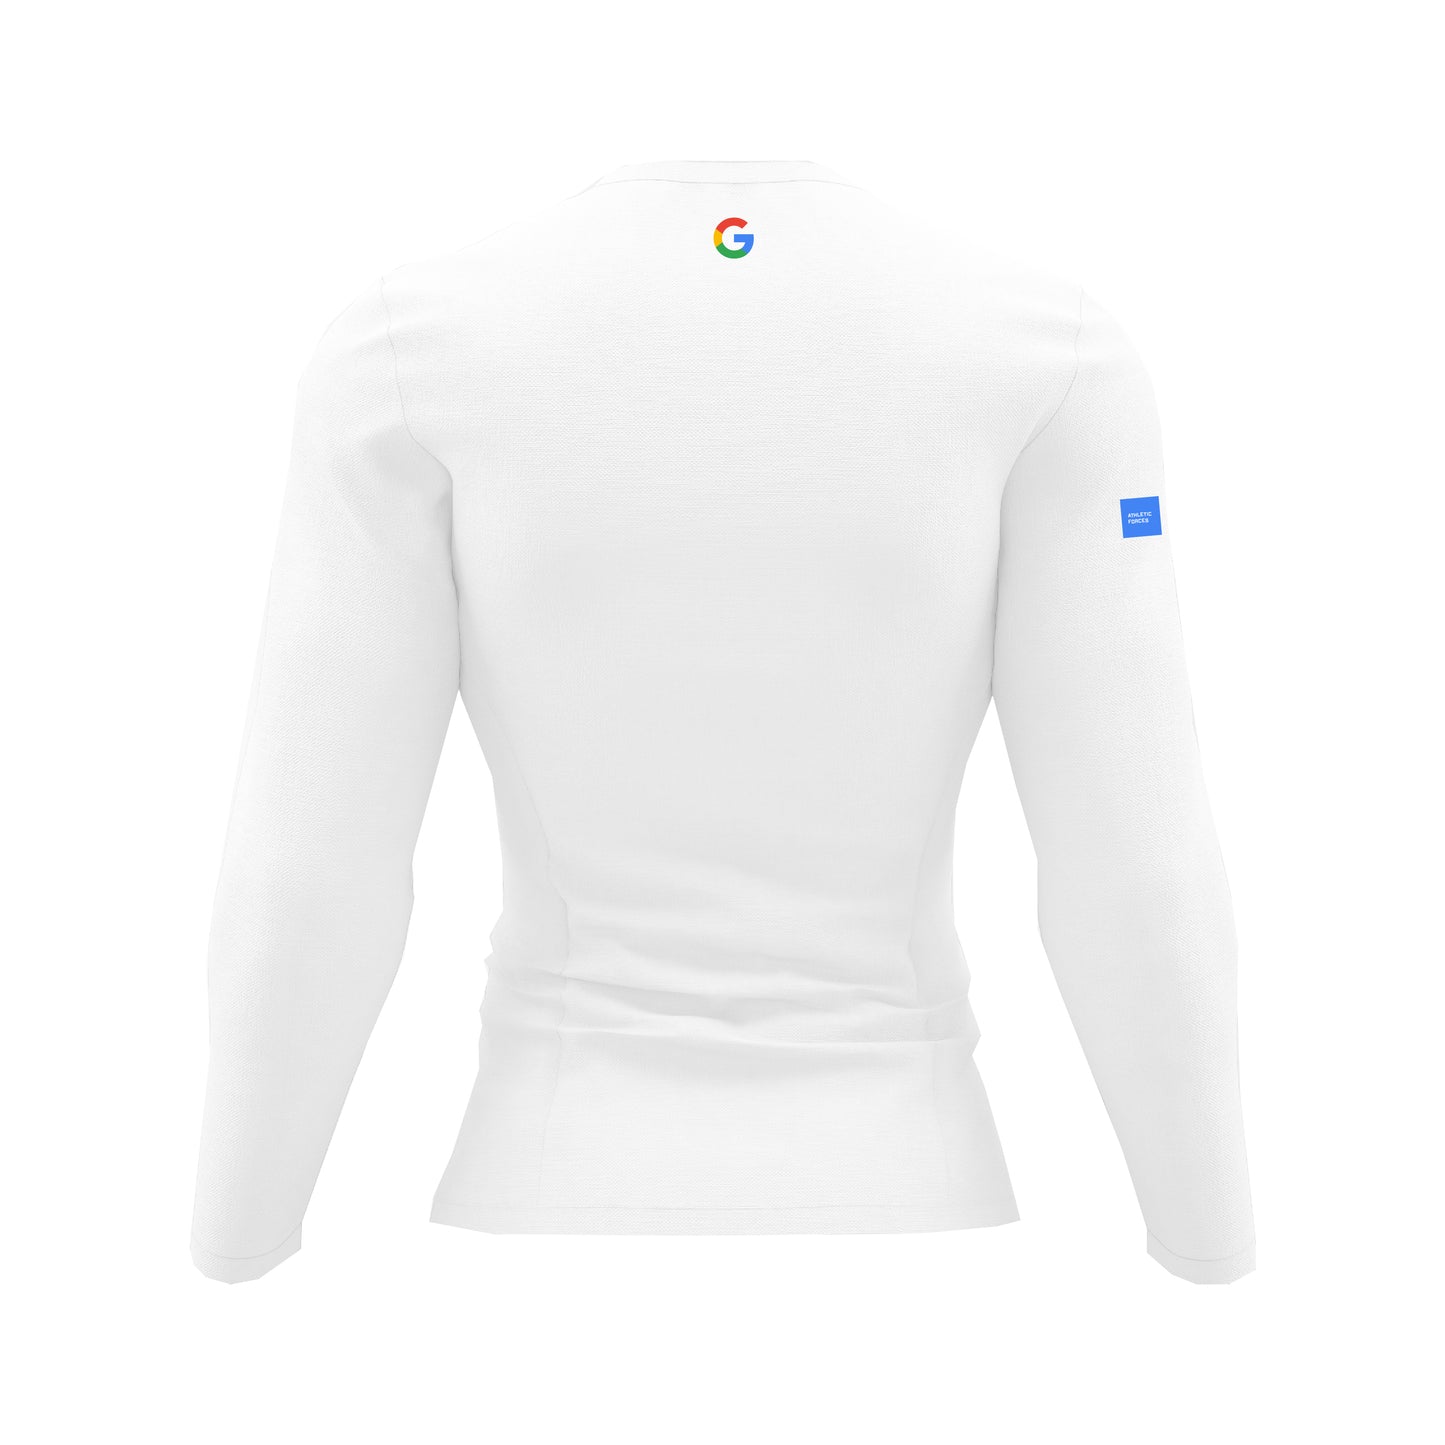 Google - Sky Force ™ Sweatshirt by Athletic Forces -  Model 1